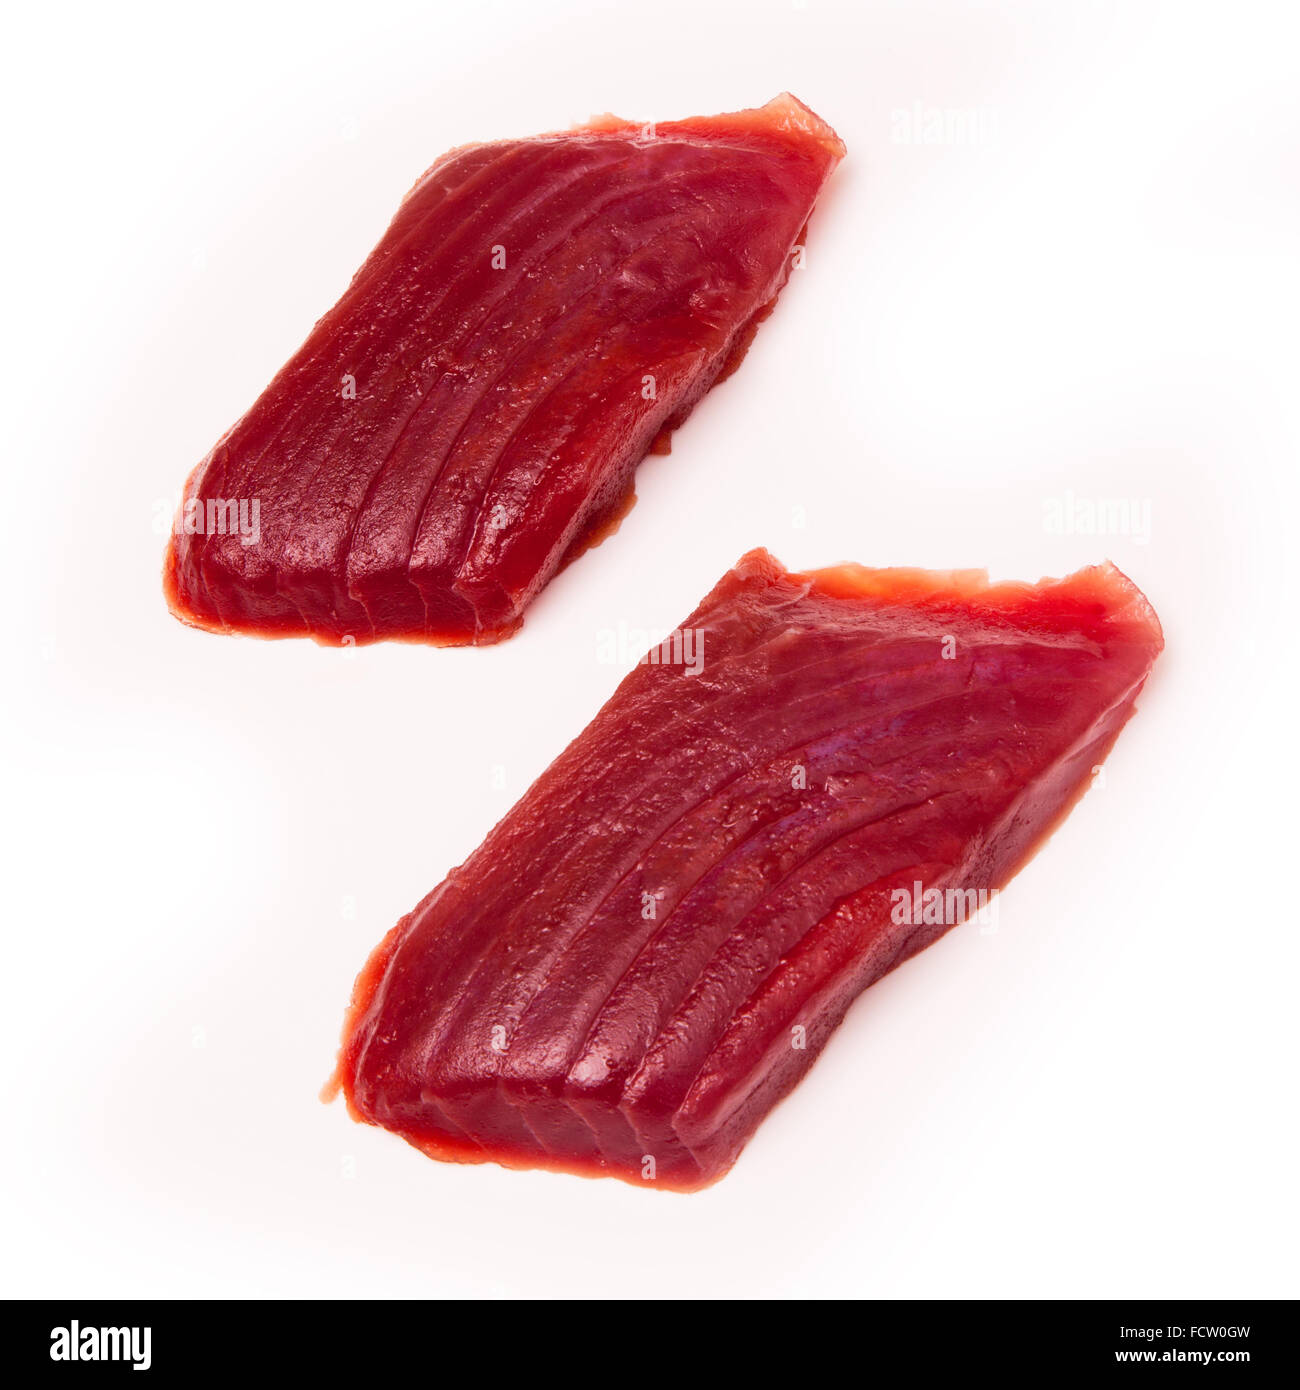 Darnes de thon albacore (thunnus albacares) isolated on a white background studio. Banque D'Images